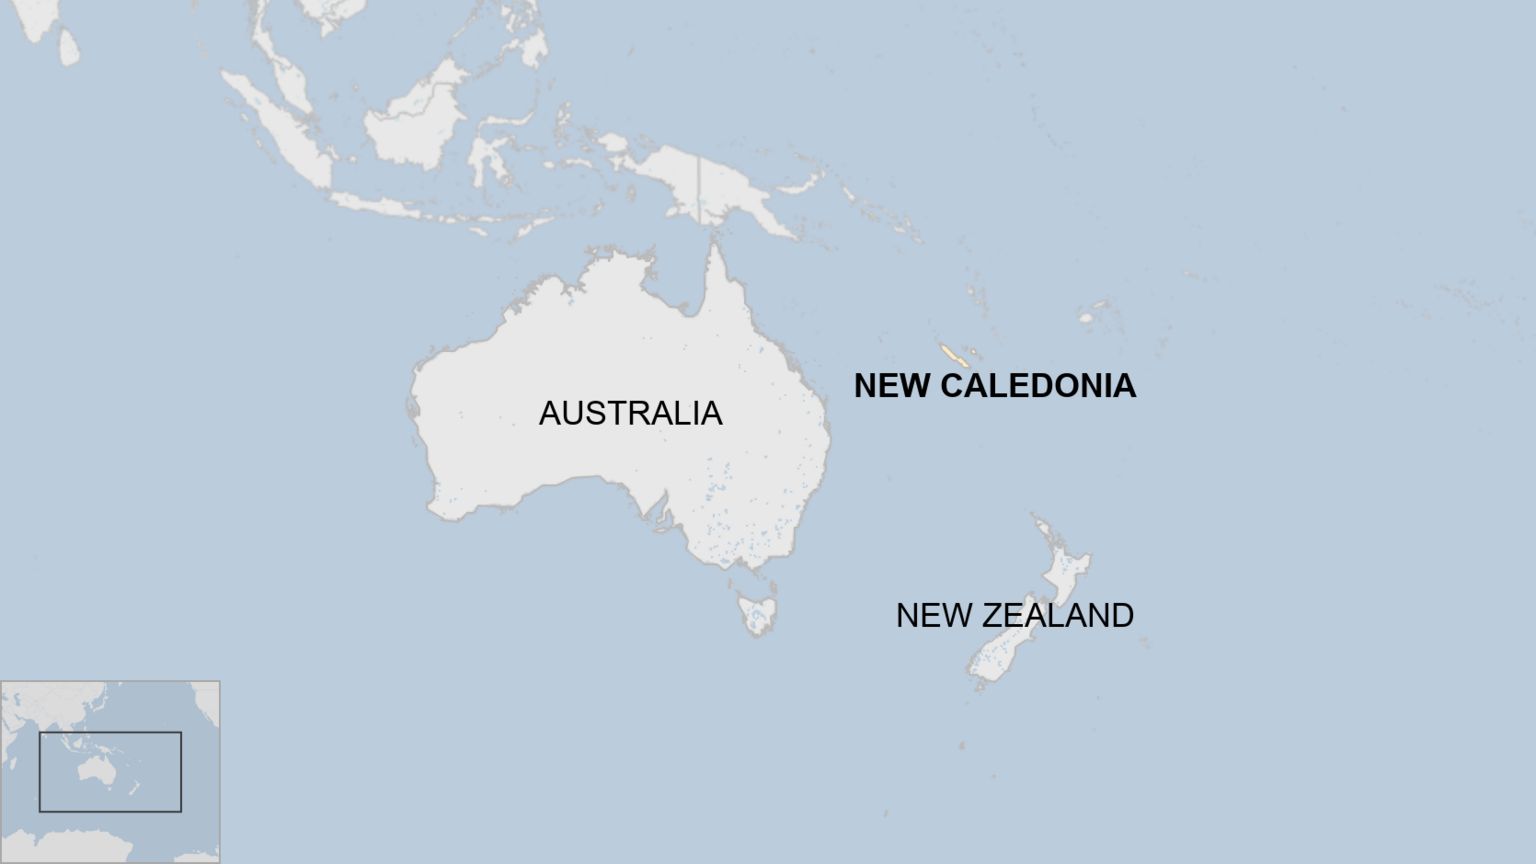 Locator map showing New Caledonia in relation to Australia and New Zealand